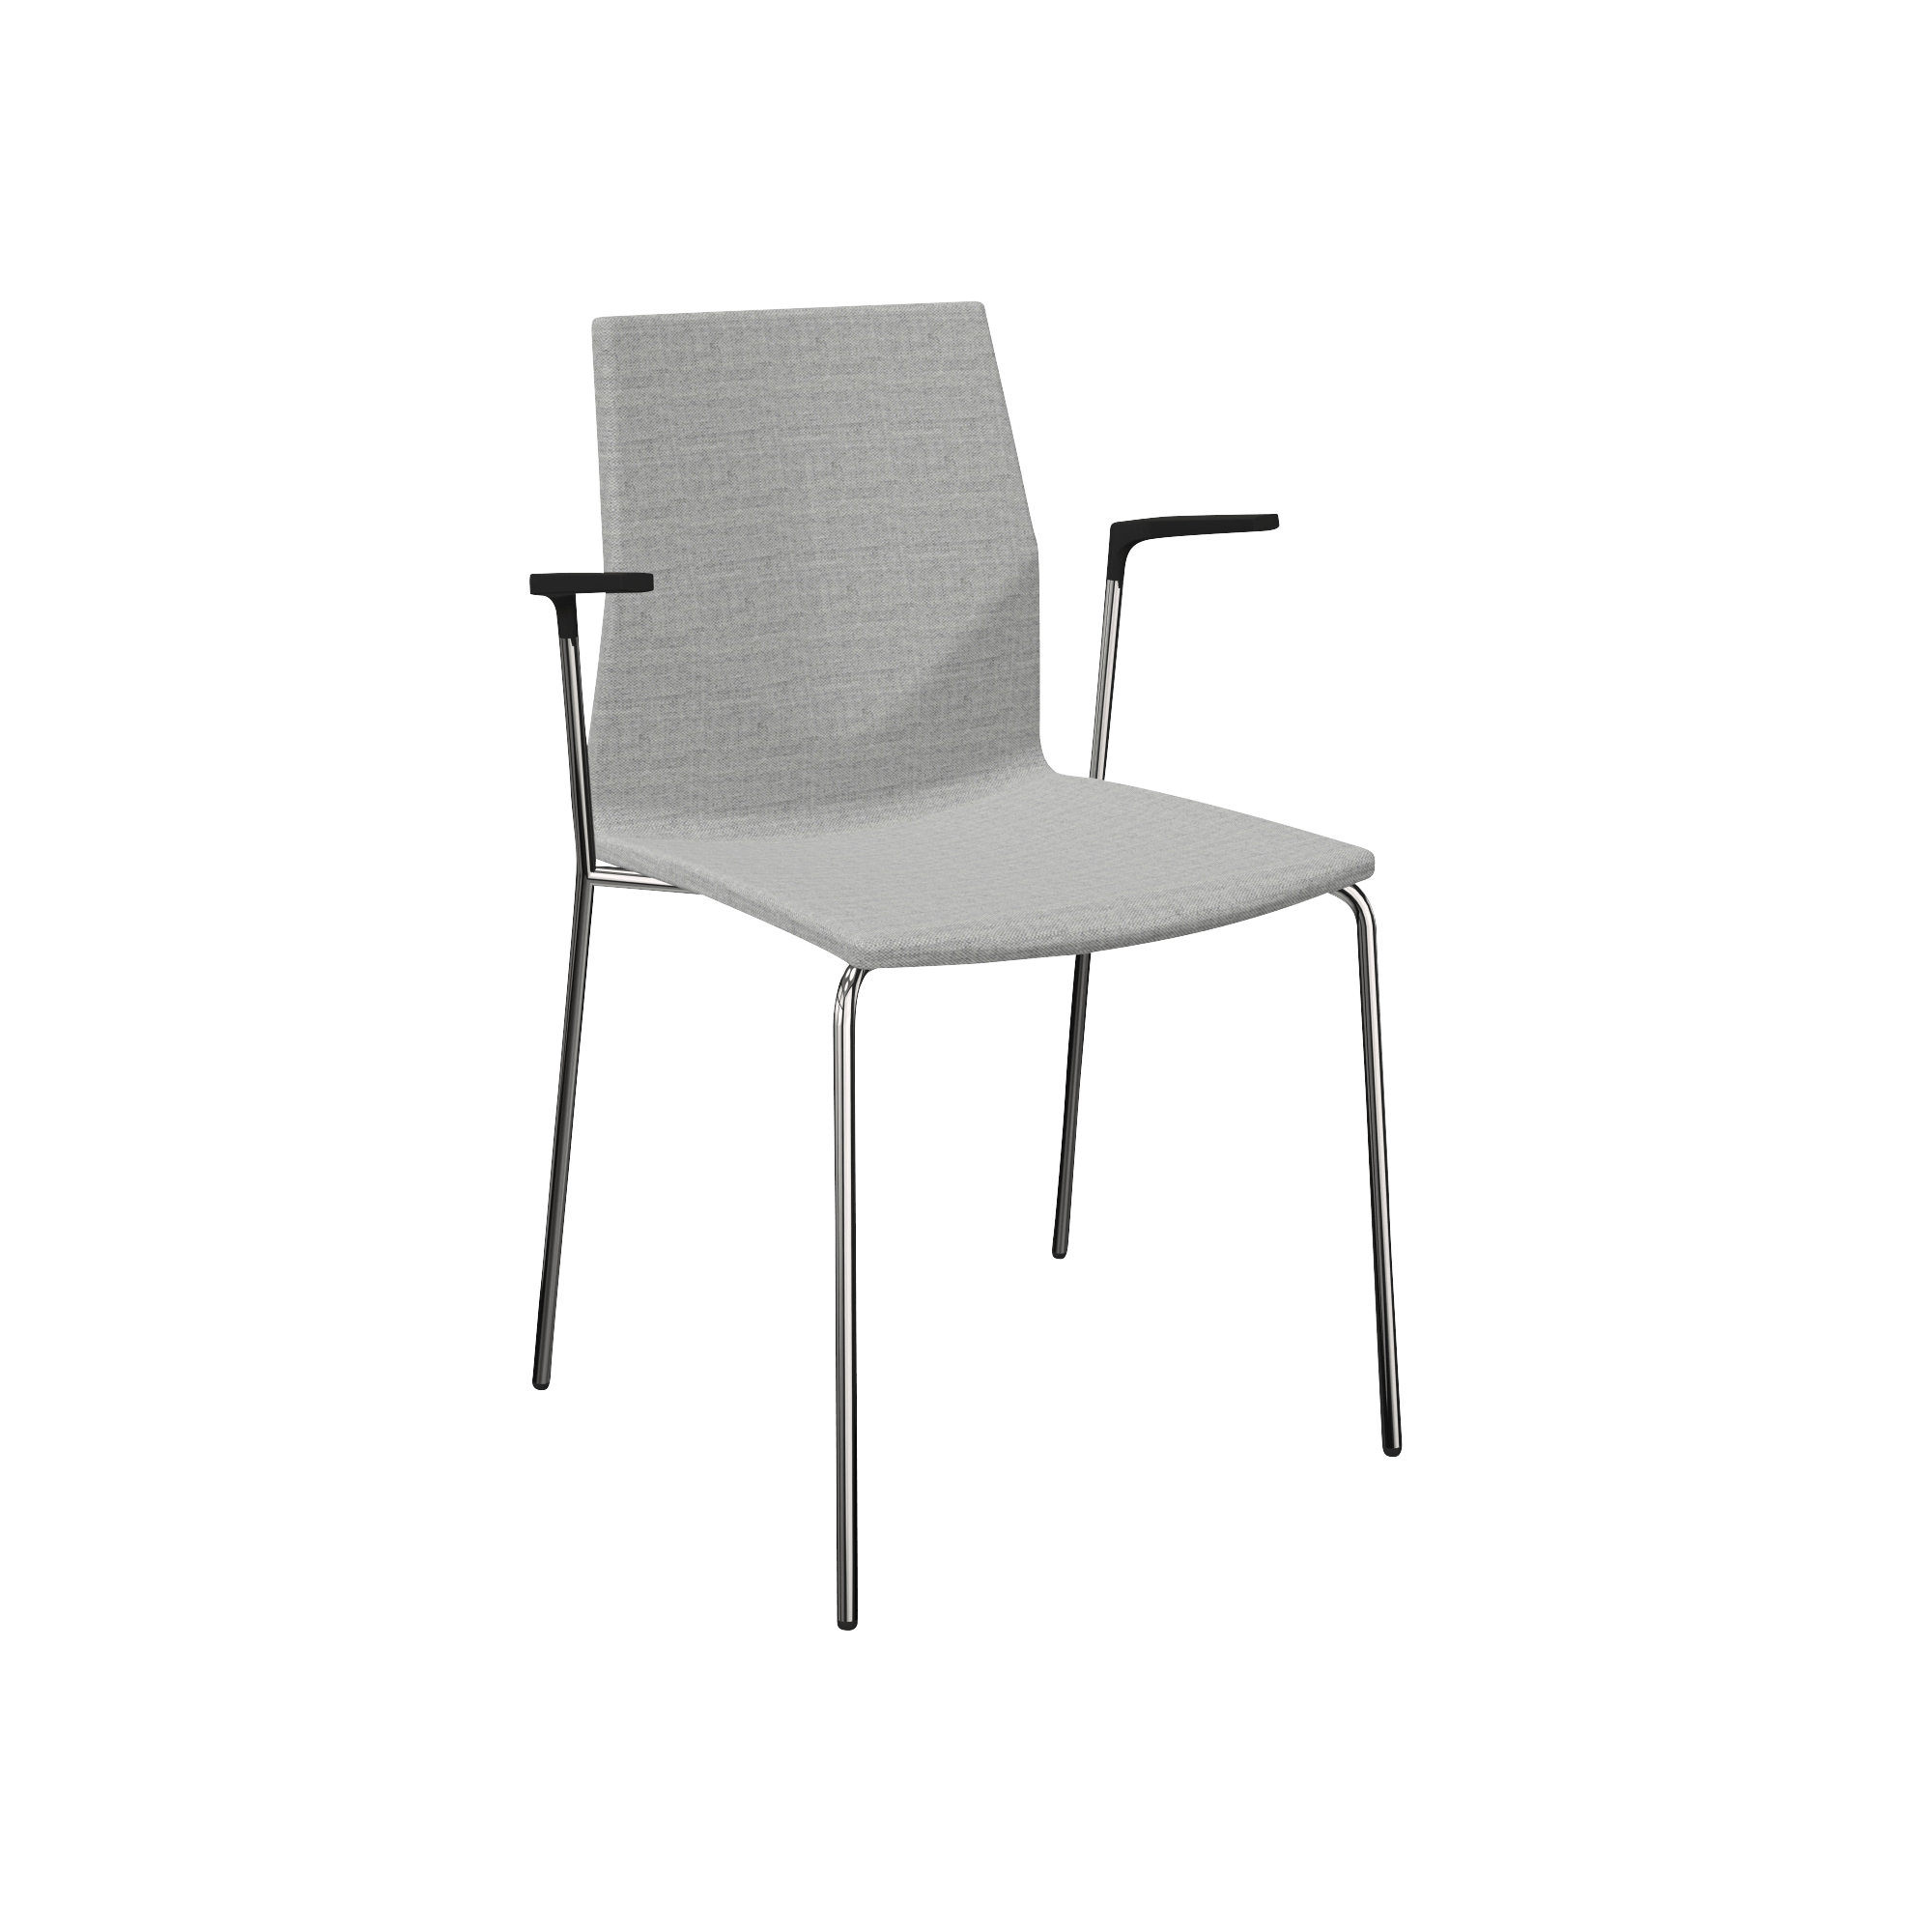 grey designer office chair with metal legs